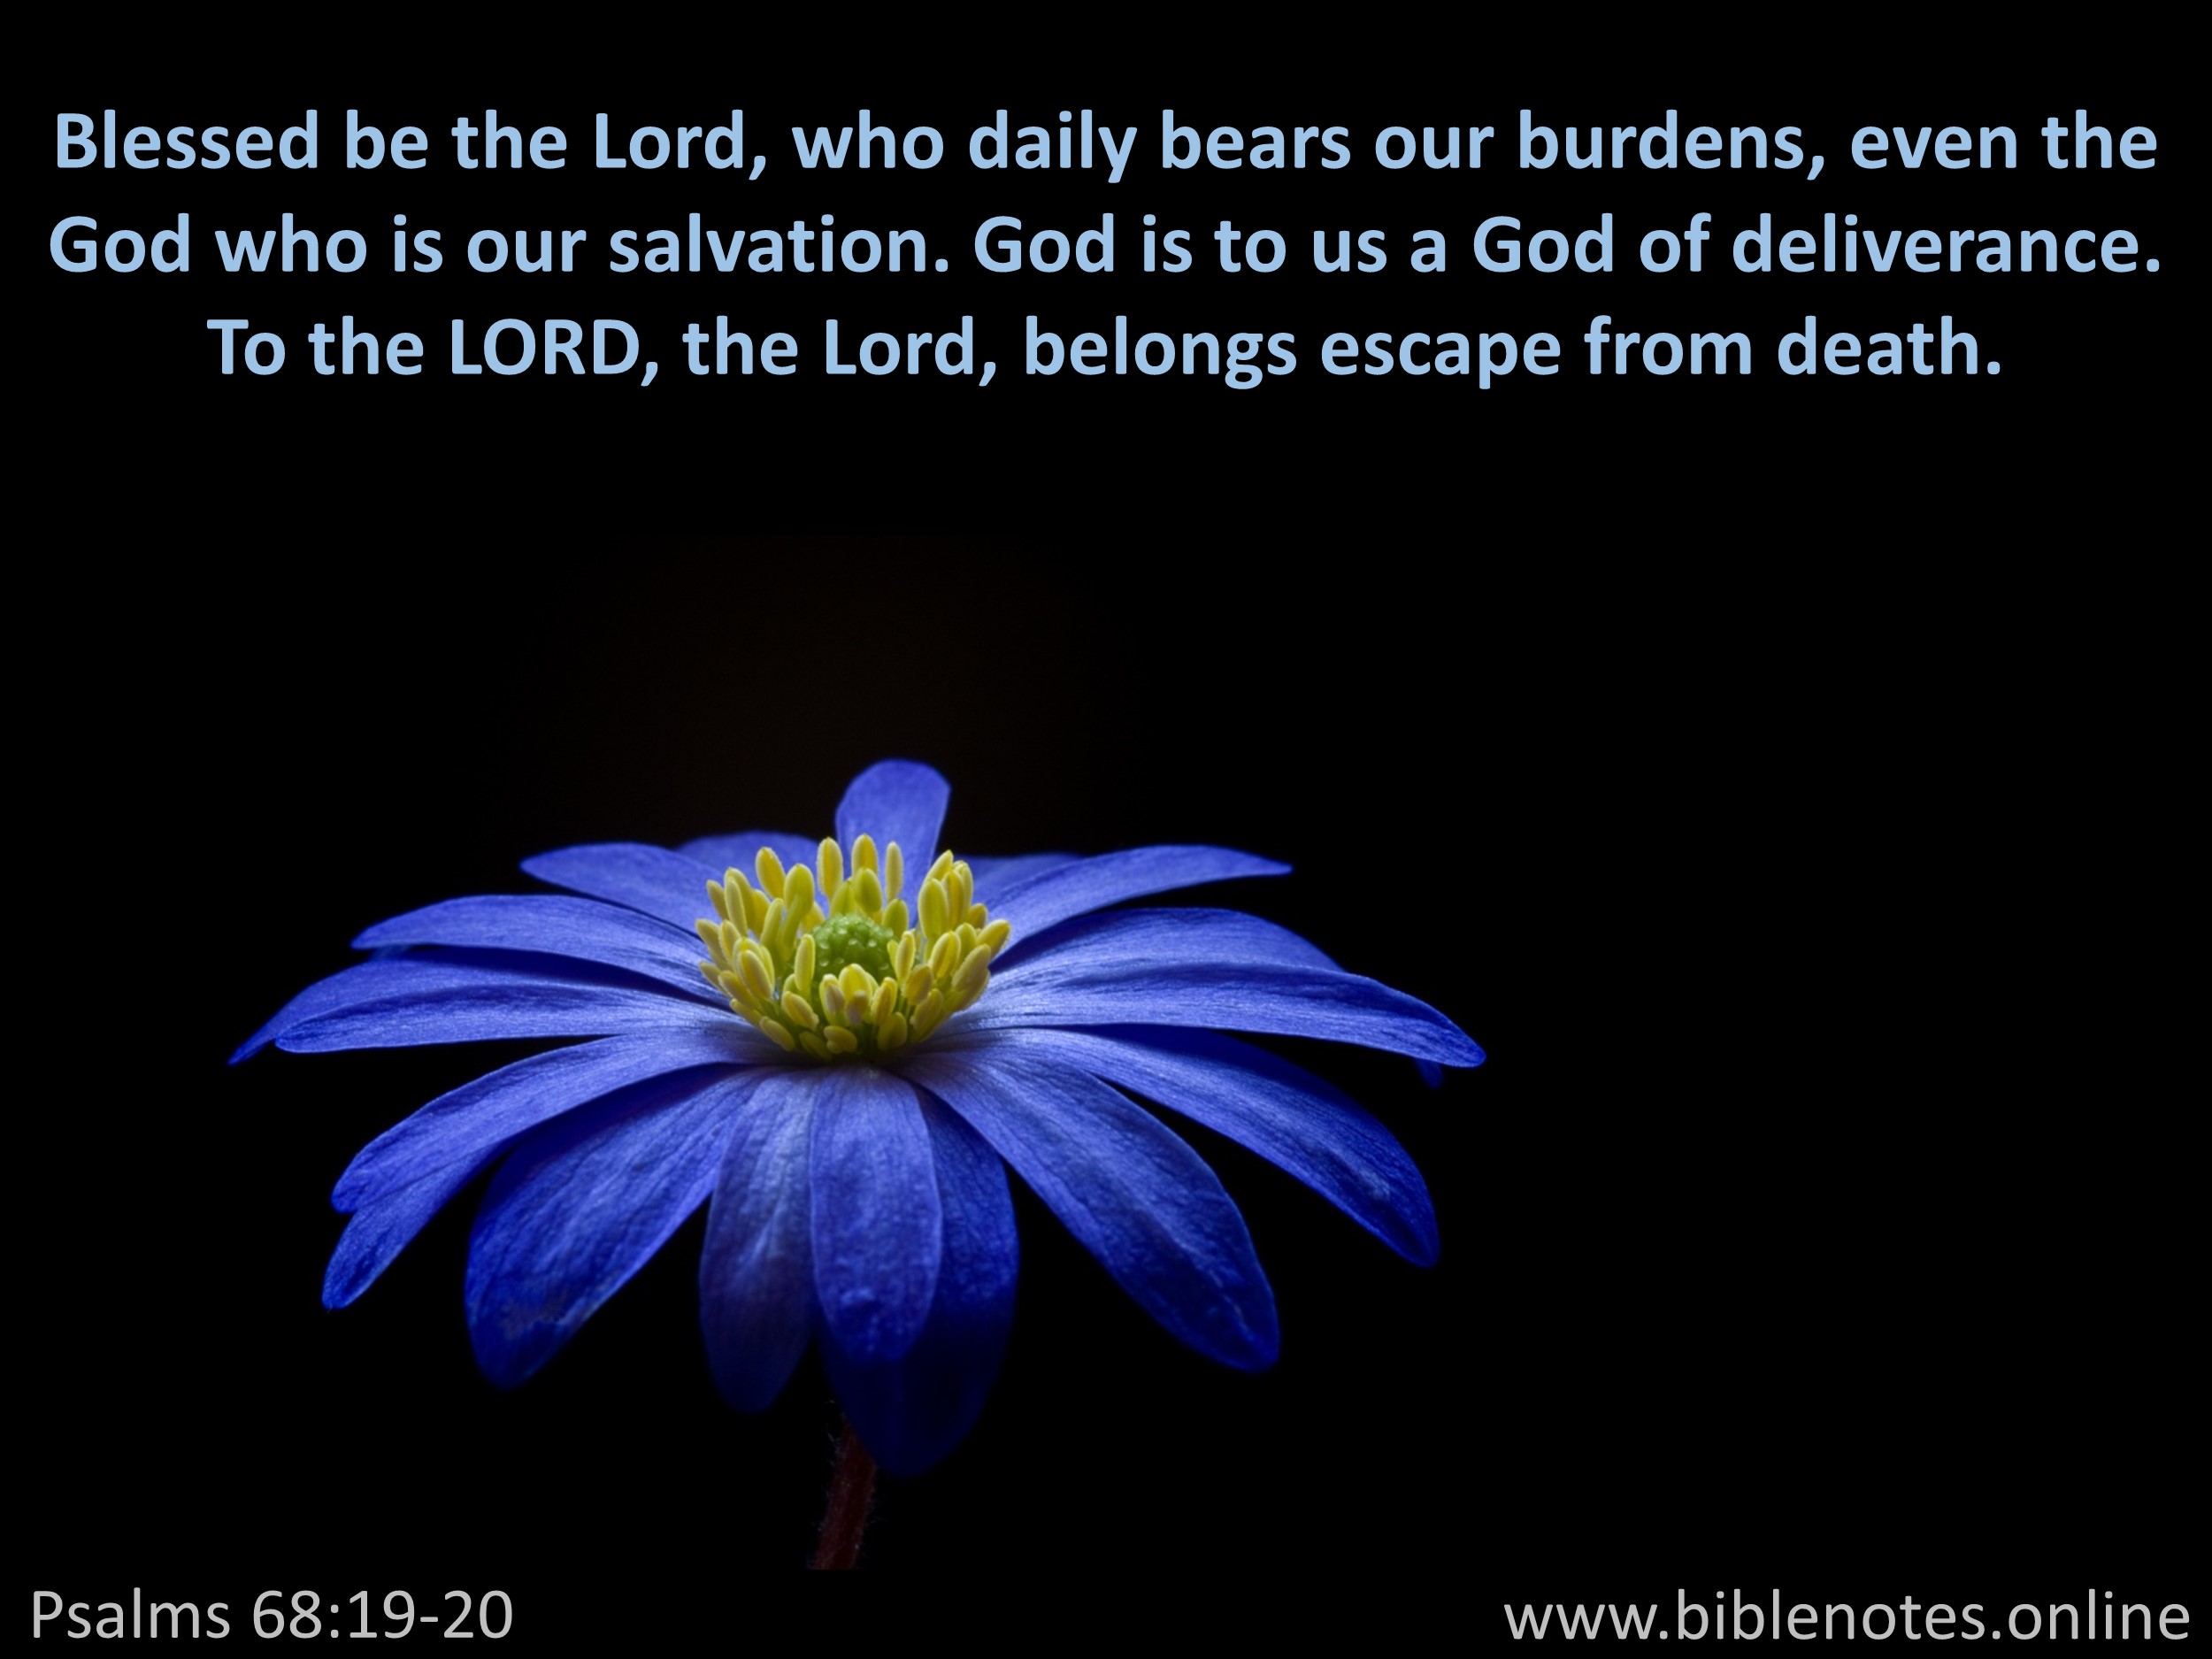 Bible Verse from Psalms Chapter 68